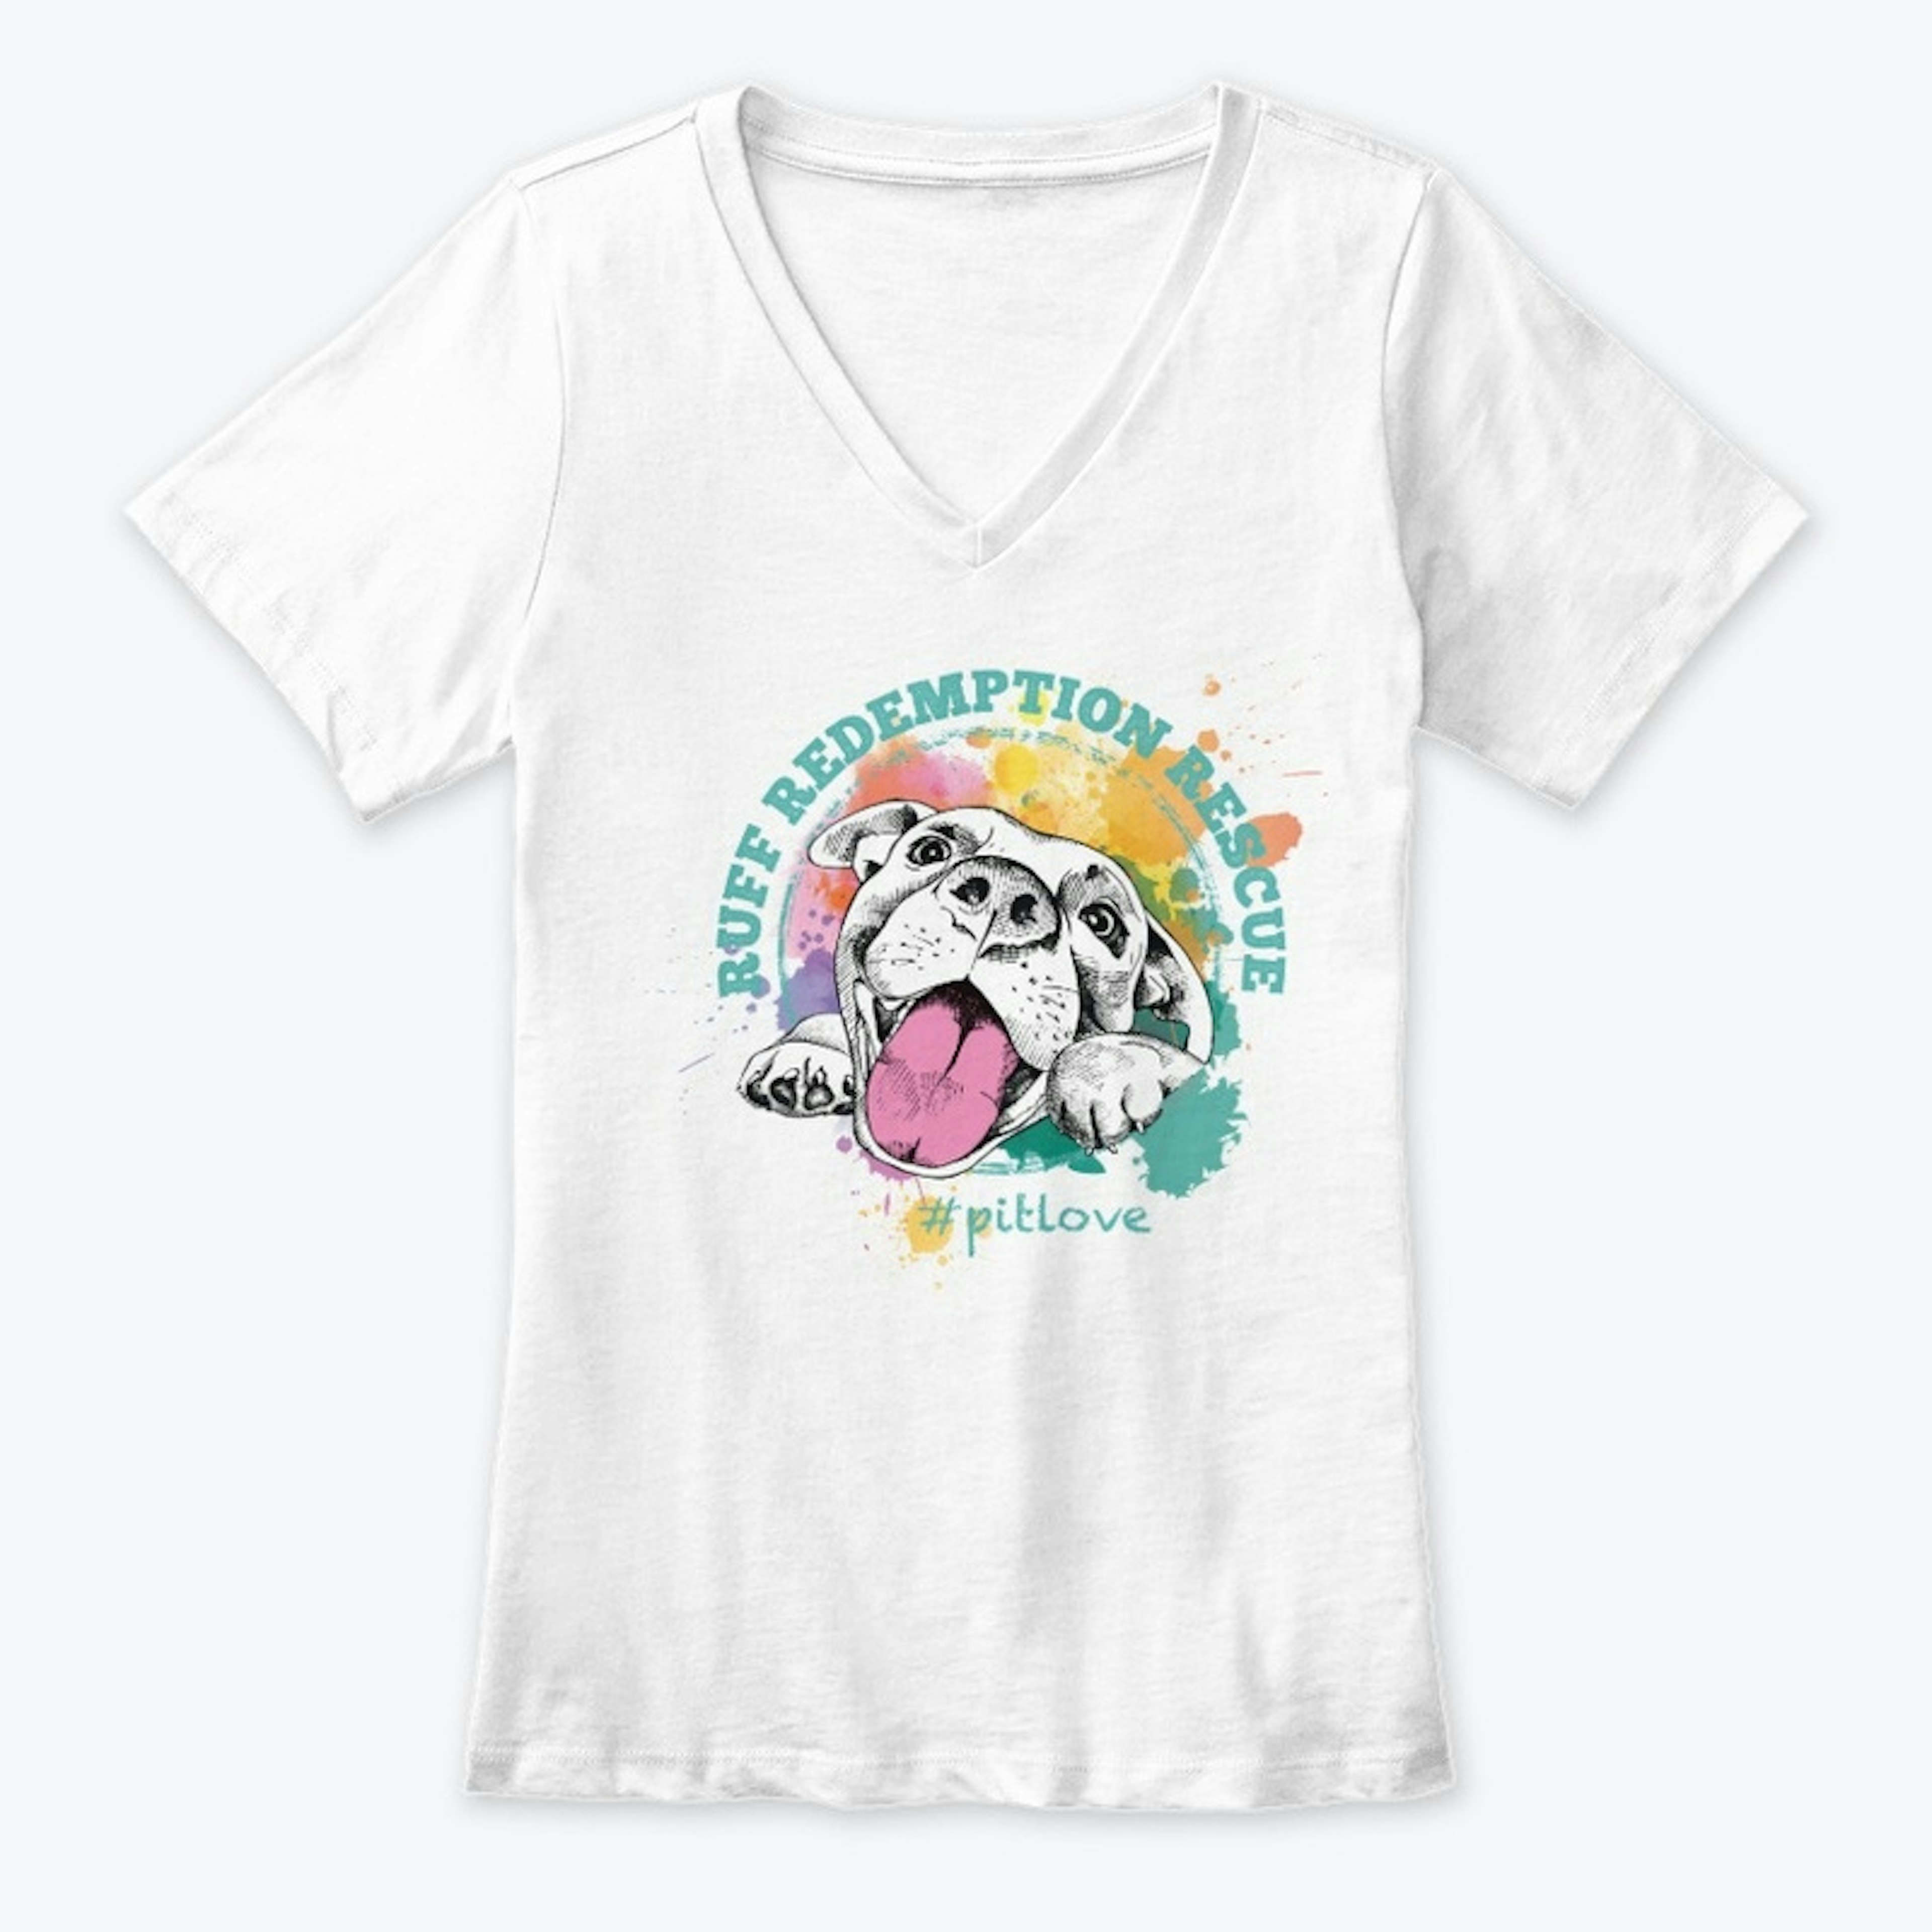 #pitlove women's fitted tee